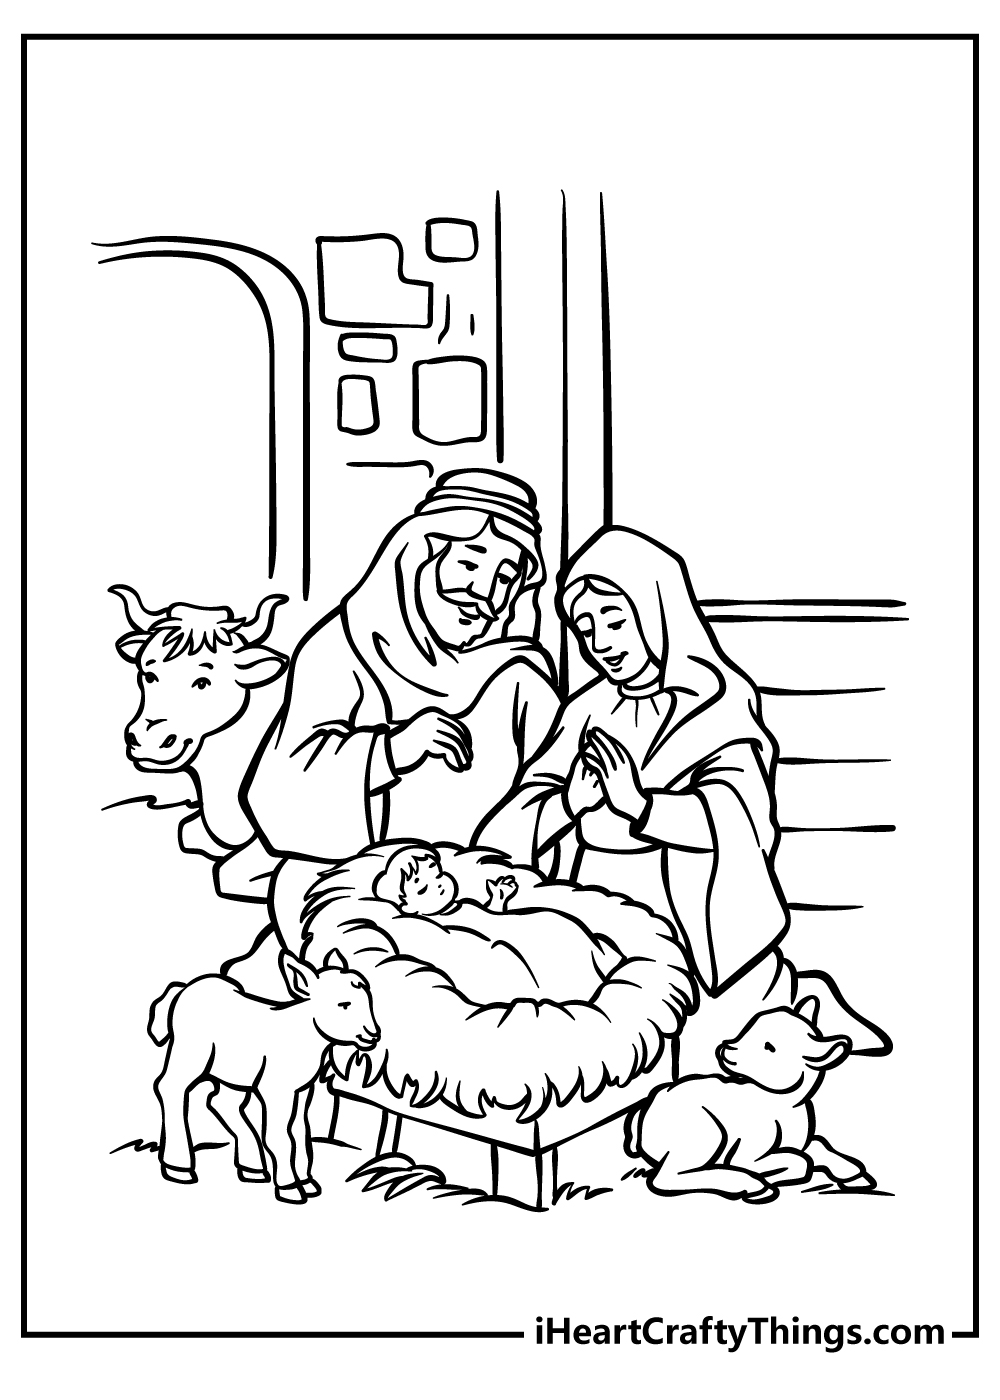 Nativity Coloring Pages for kids free download